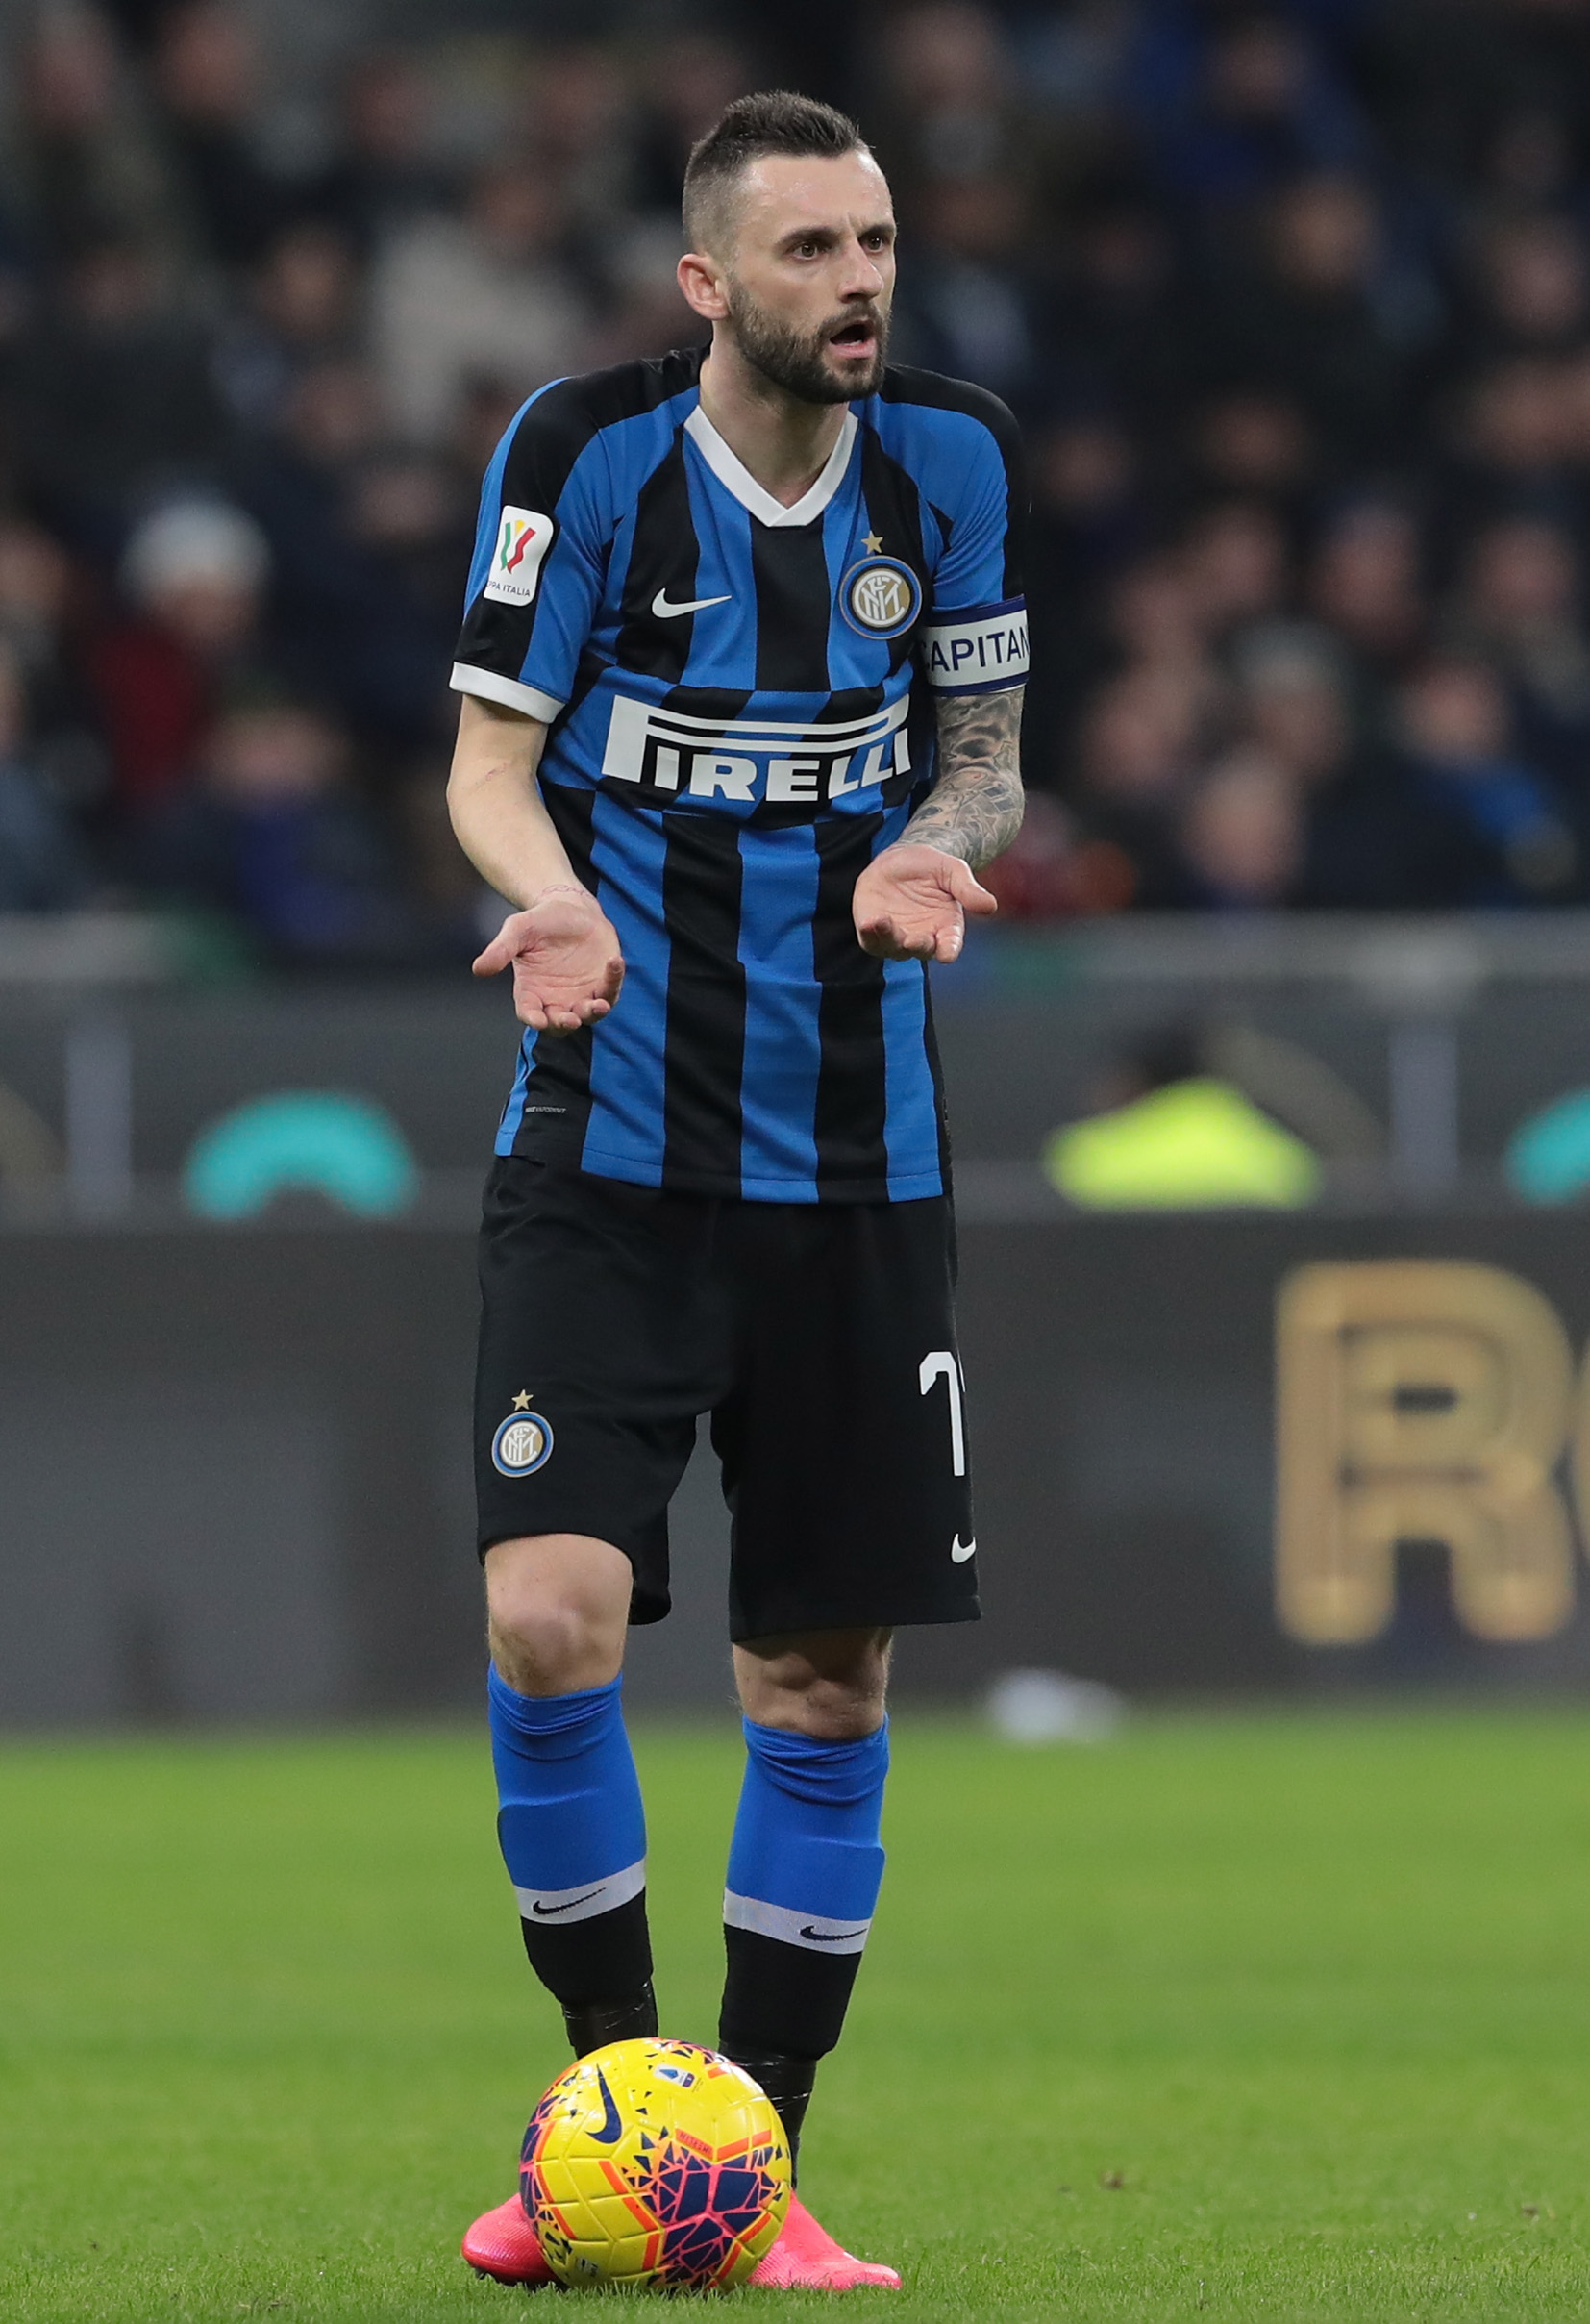 MILAN, ITALY - FEBRUARY 12:  Marcelo Brozovic of FC Internazionale gestures during the Coppa Italia Semi Final match between FC Internazionale and SSC Napoli at Stadio Giuseppe Meazza on February 12, 2020 in Milan, Italy.  (Photo by Emilio Andreoli/Getty Images)